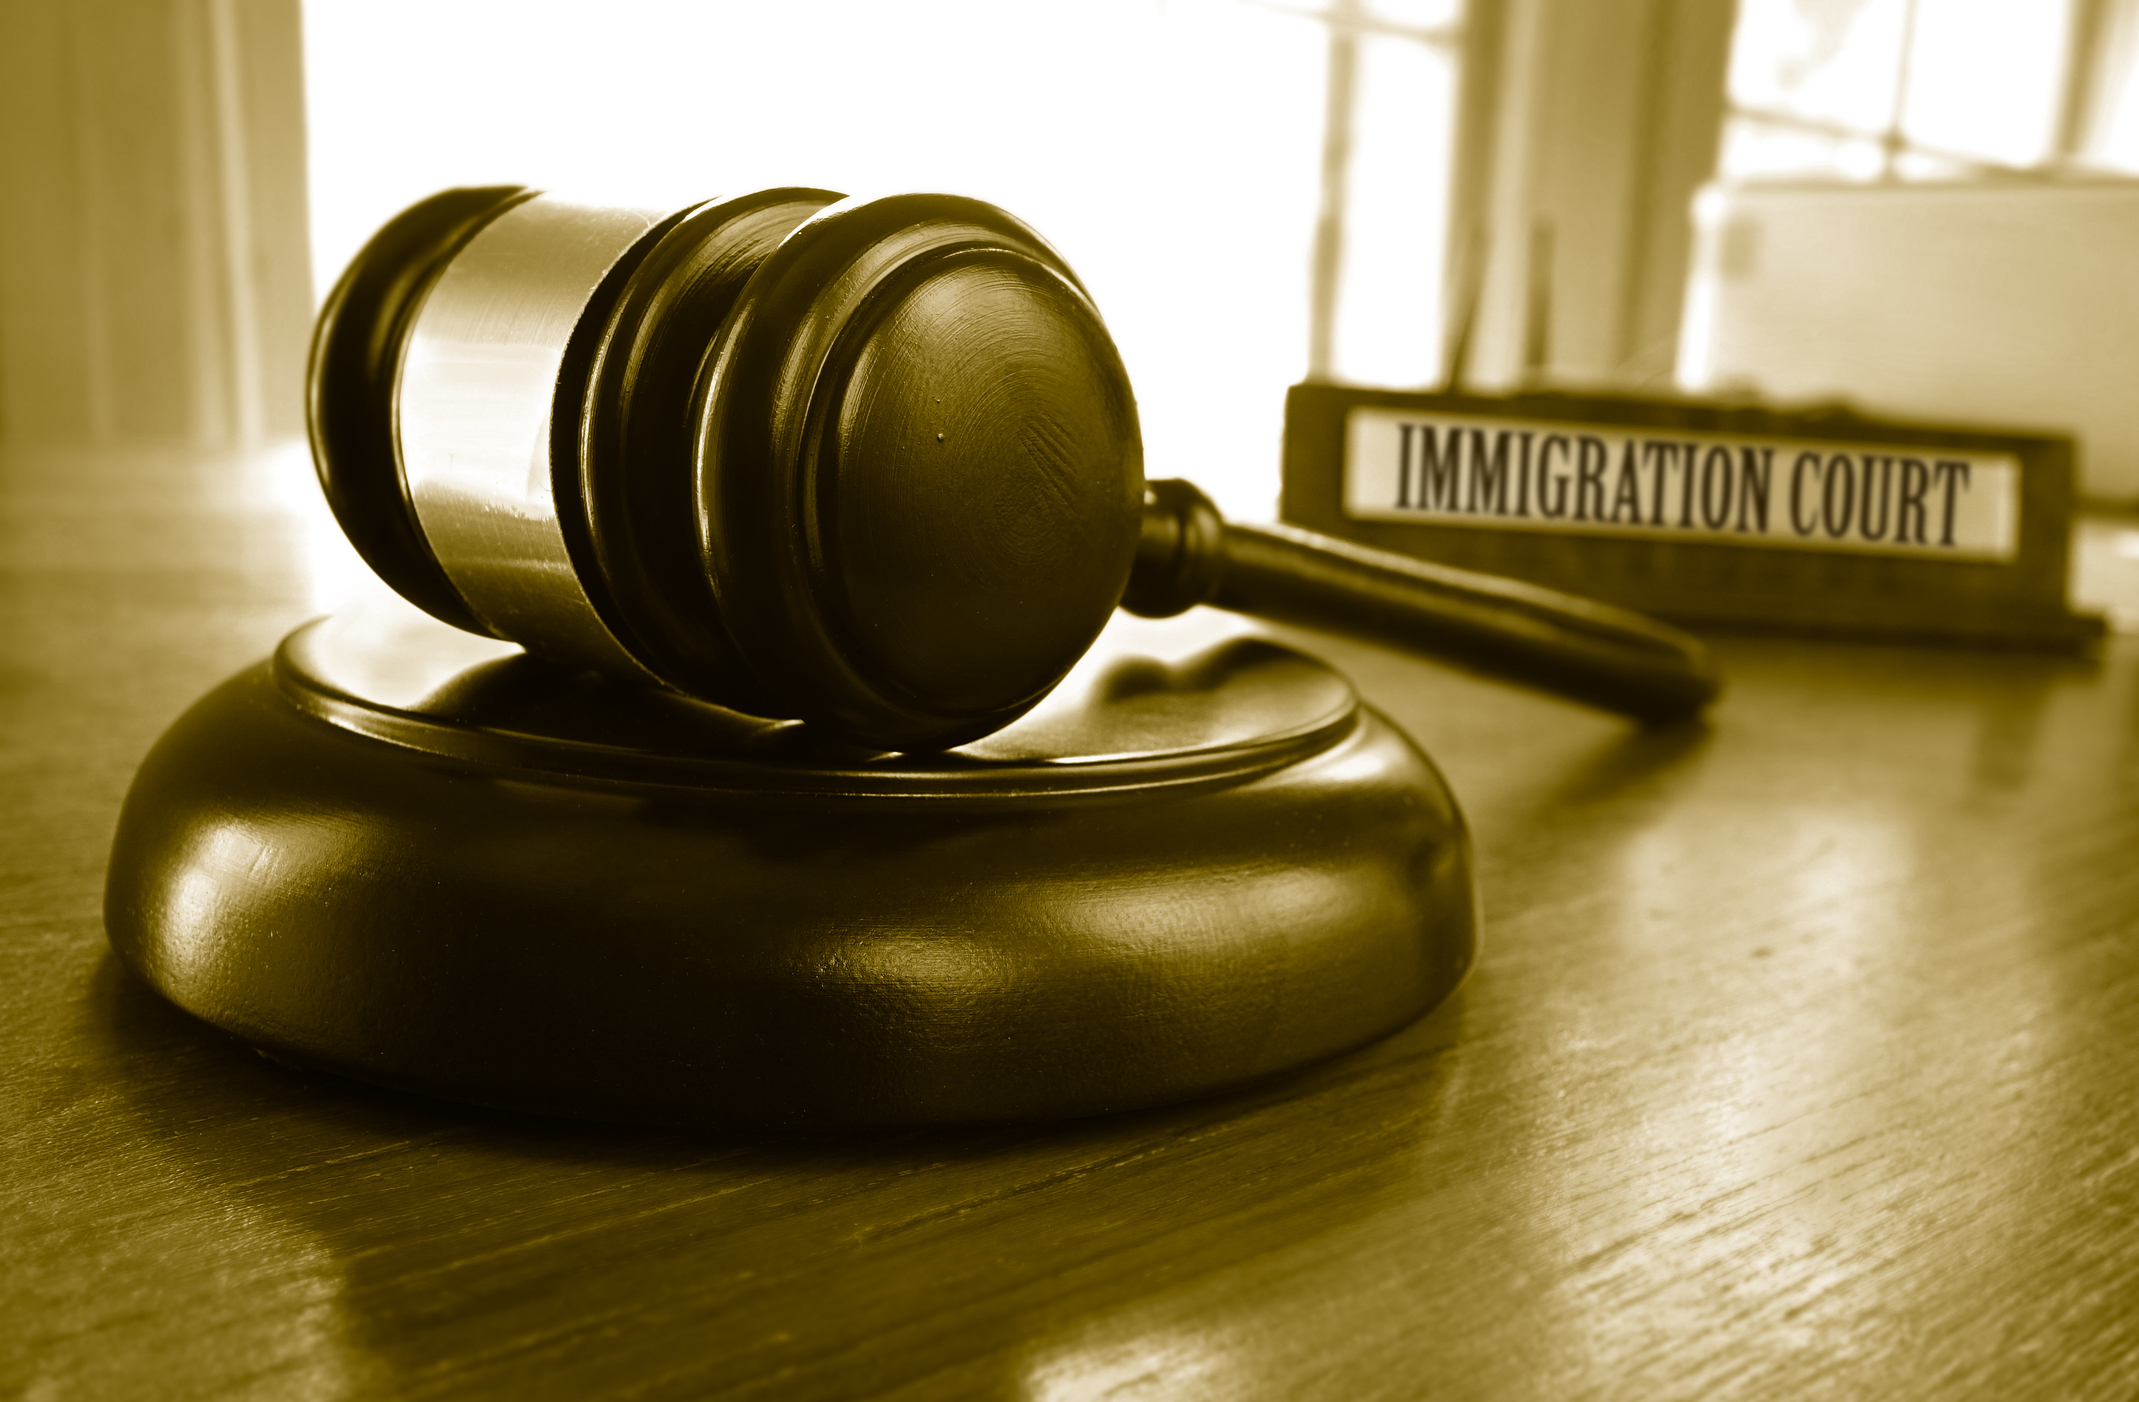 D.C. Circuit Court Along with Nine Other Circuit Courts Rules that USCIS Has Final Say in Visa Revocations